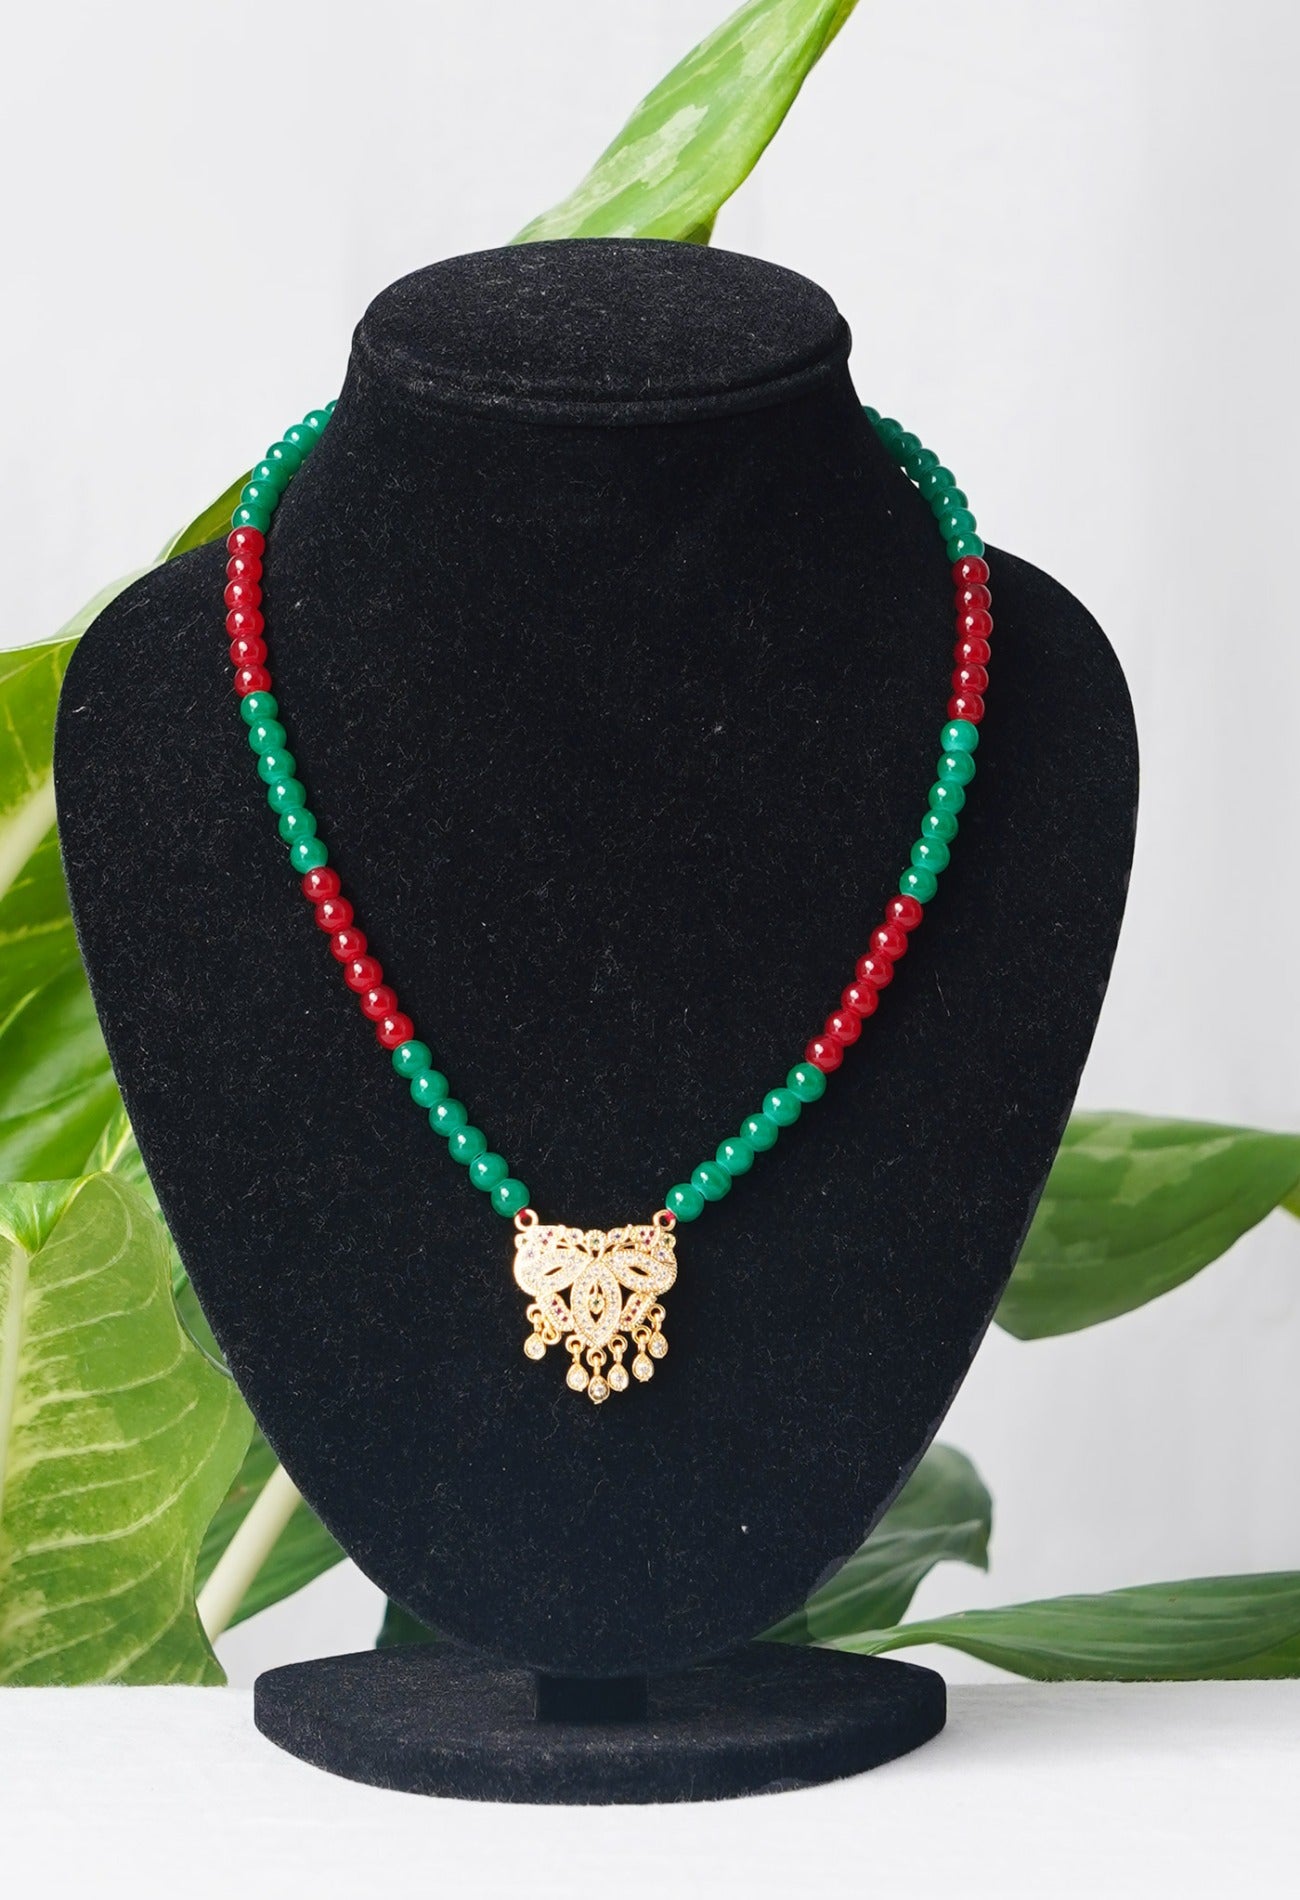 Green-Red Amravati Ocean Beads Necklace with Micro Gold Plated Pendant-UJ137